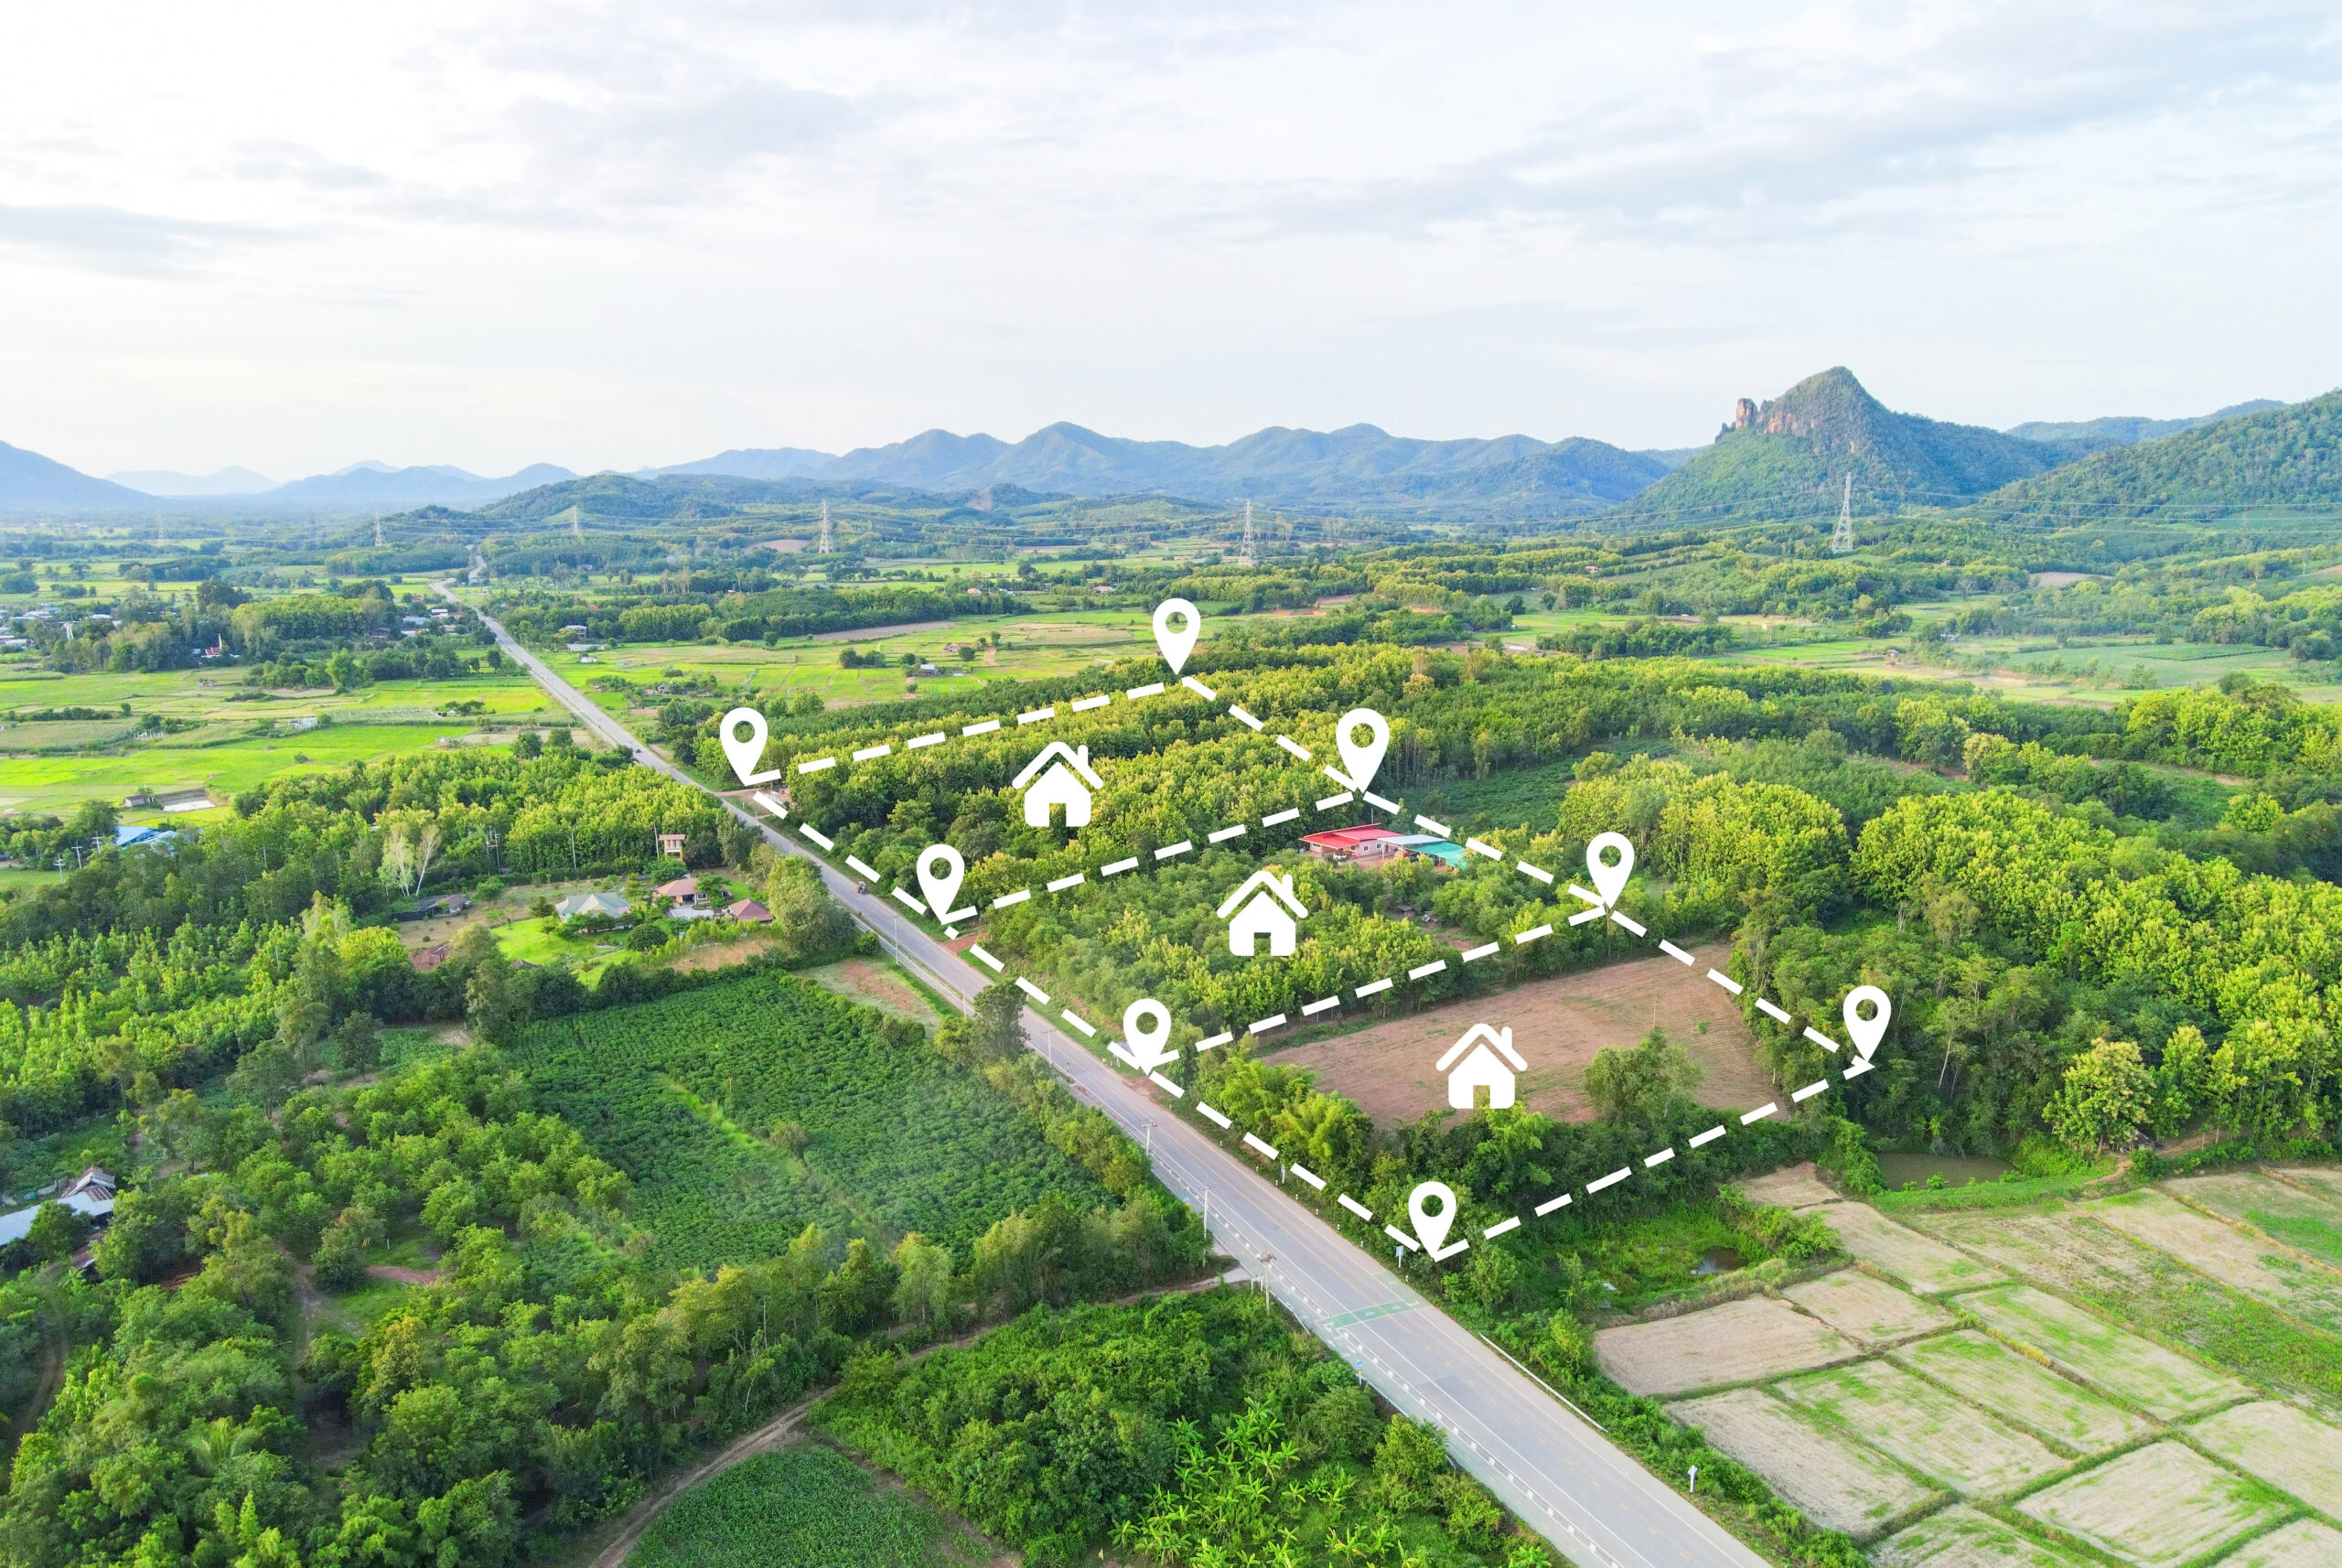 Land plot for building house aerial view, land field with pins, pin location for housing subdivision residential development owned sale rent buy or investment home or house expand the city suburb